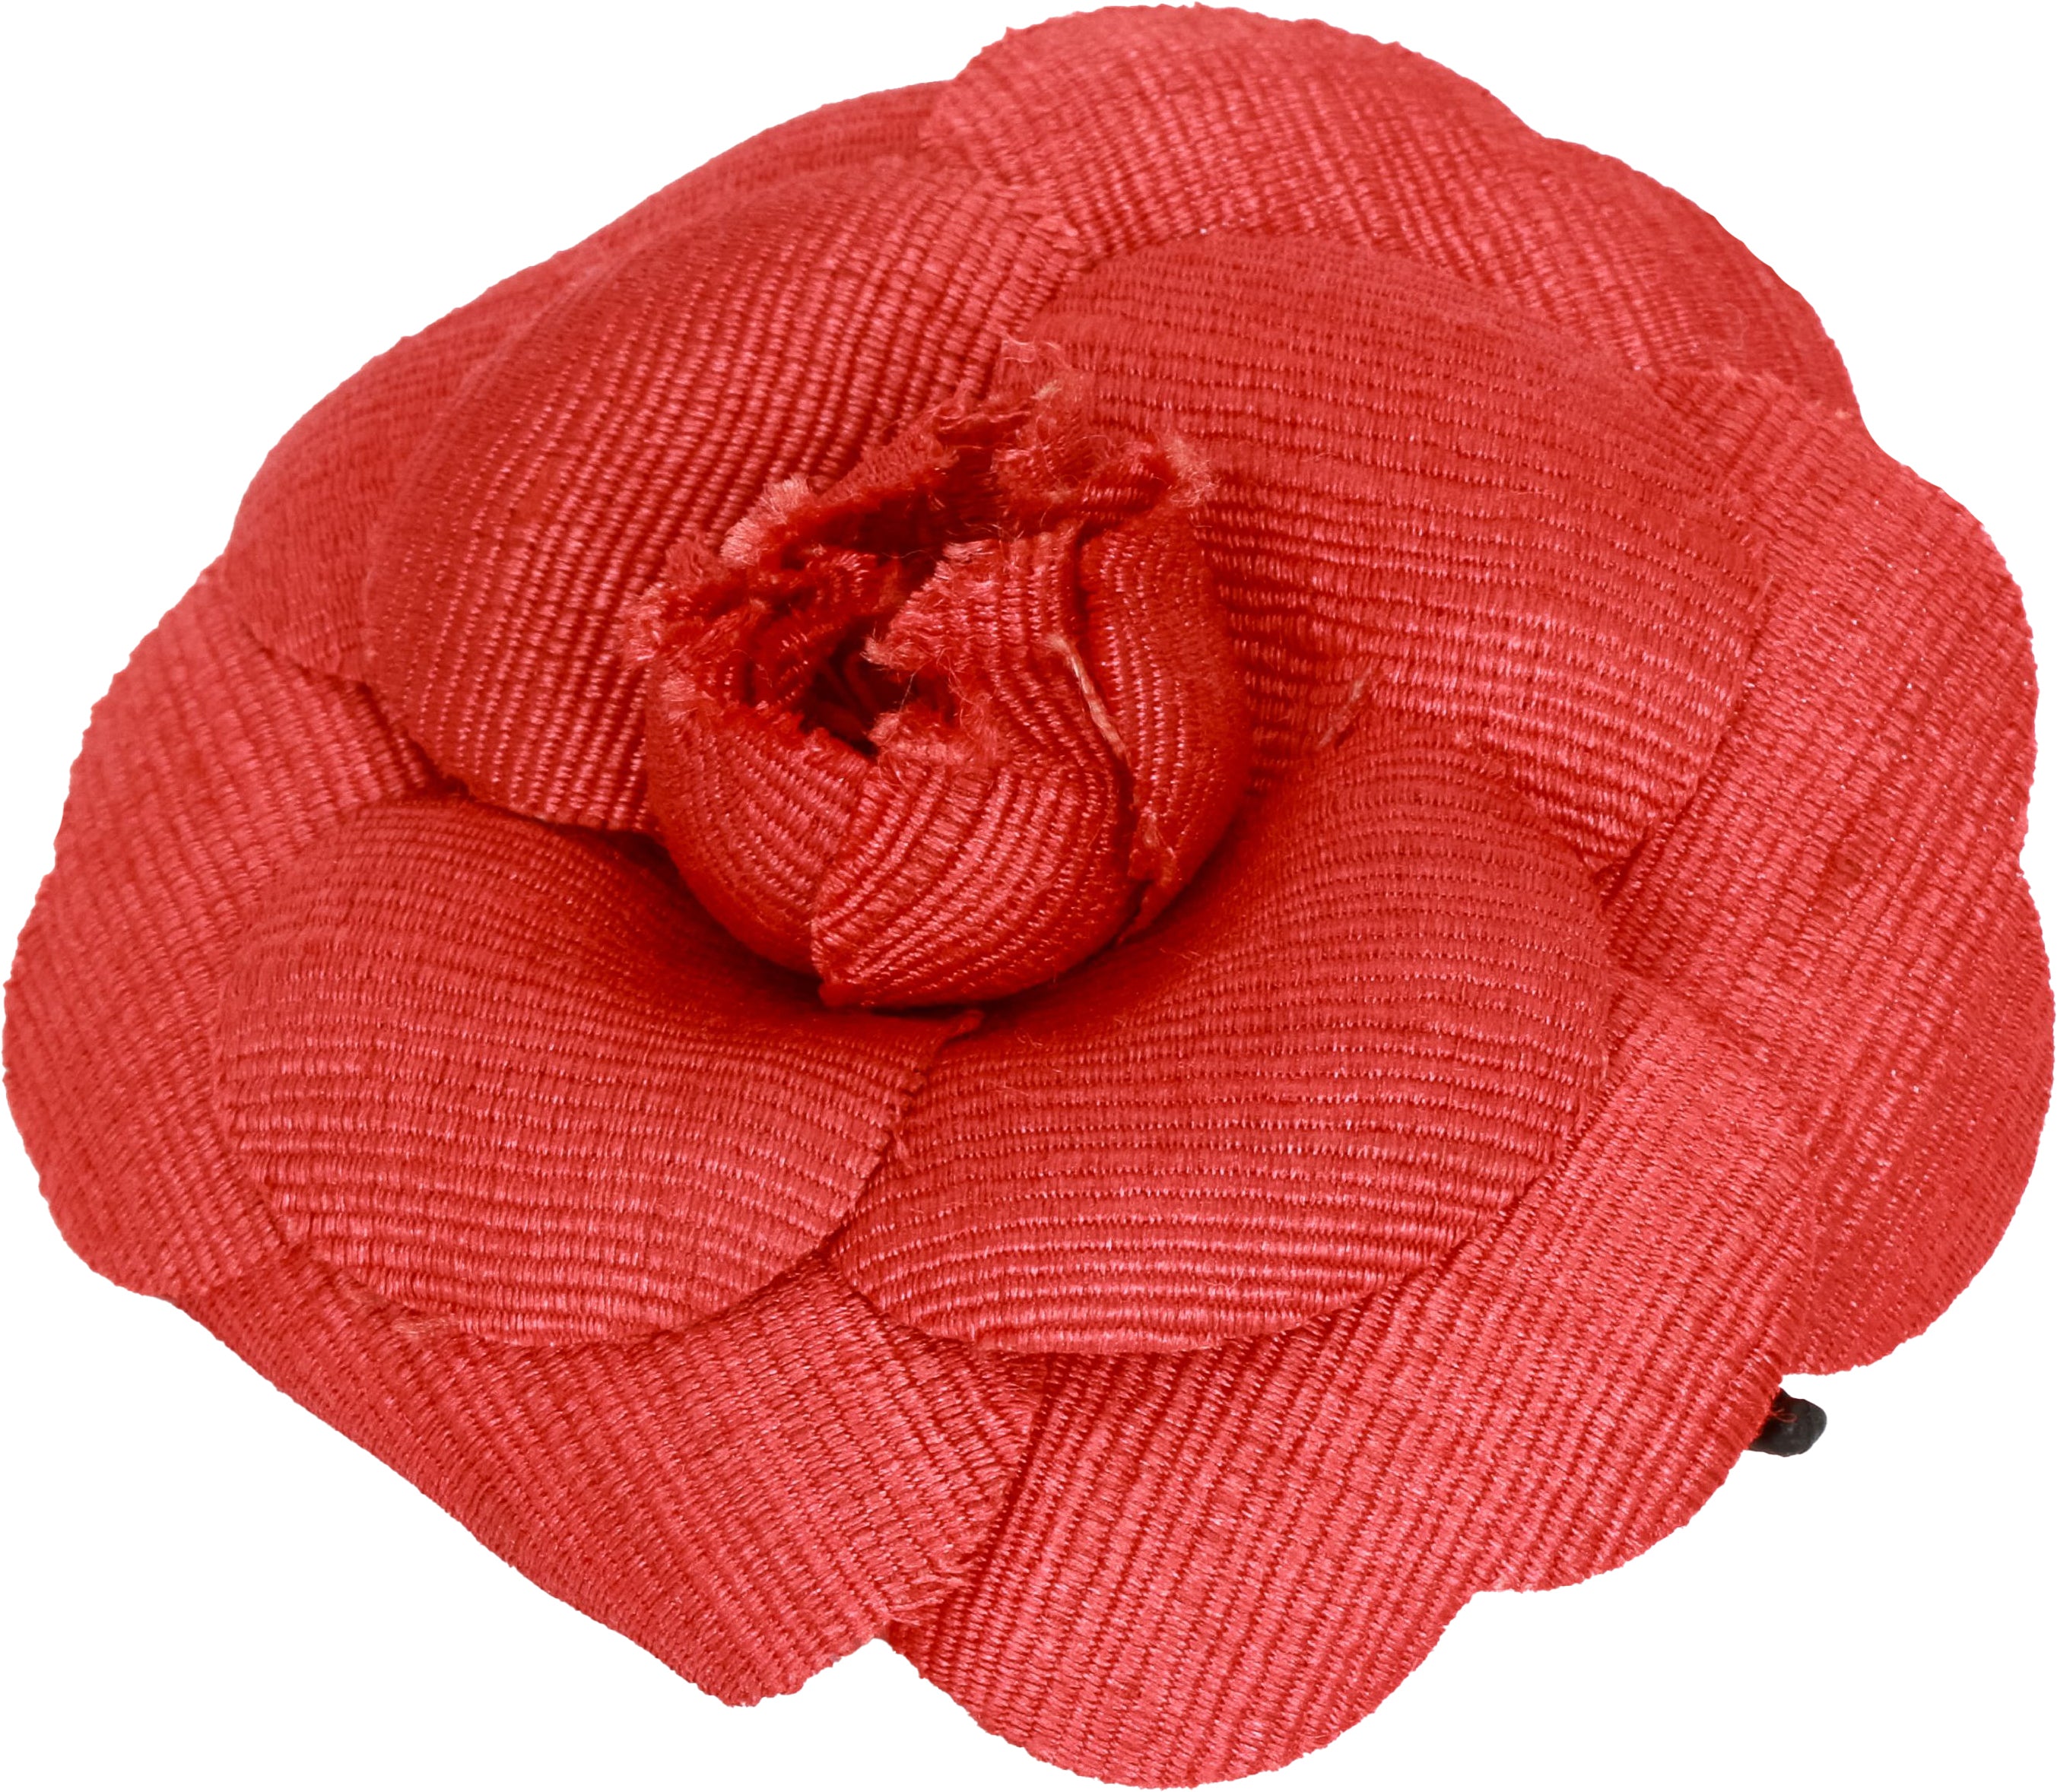 Chanel large red fabric camellia brooch - Vintage Lux